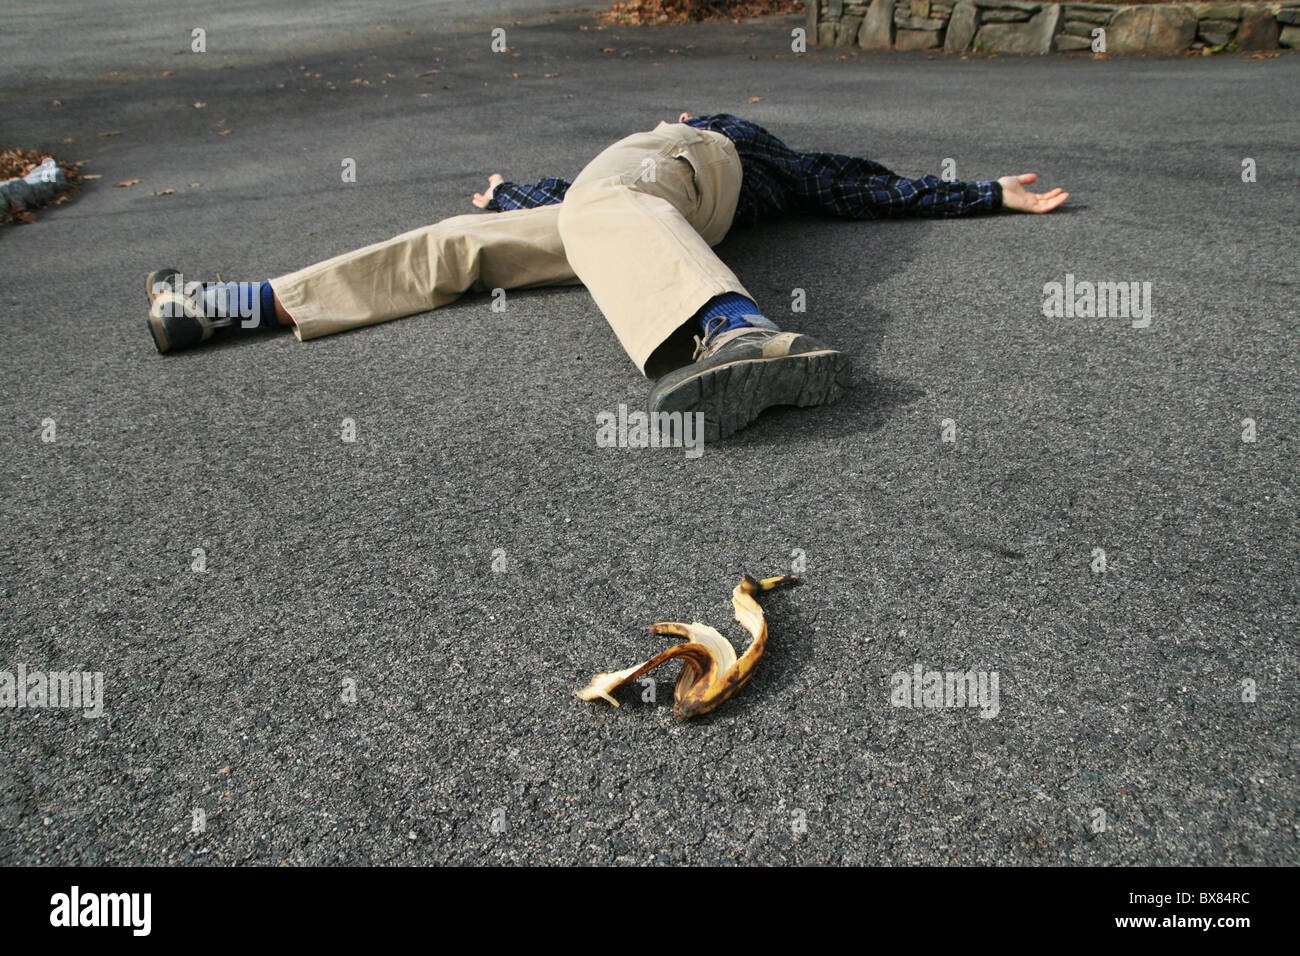 a man who had an accident when he slipped on a banana peel lies on the ground Stock Photo